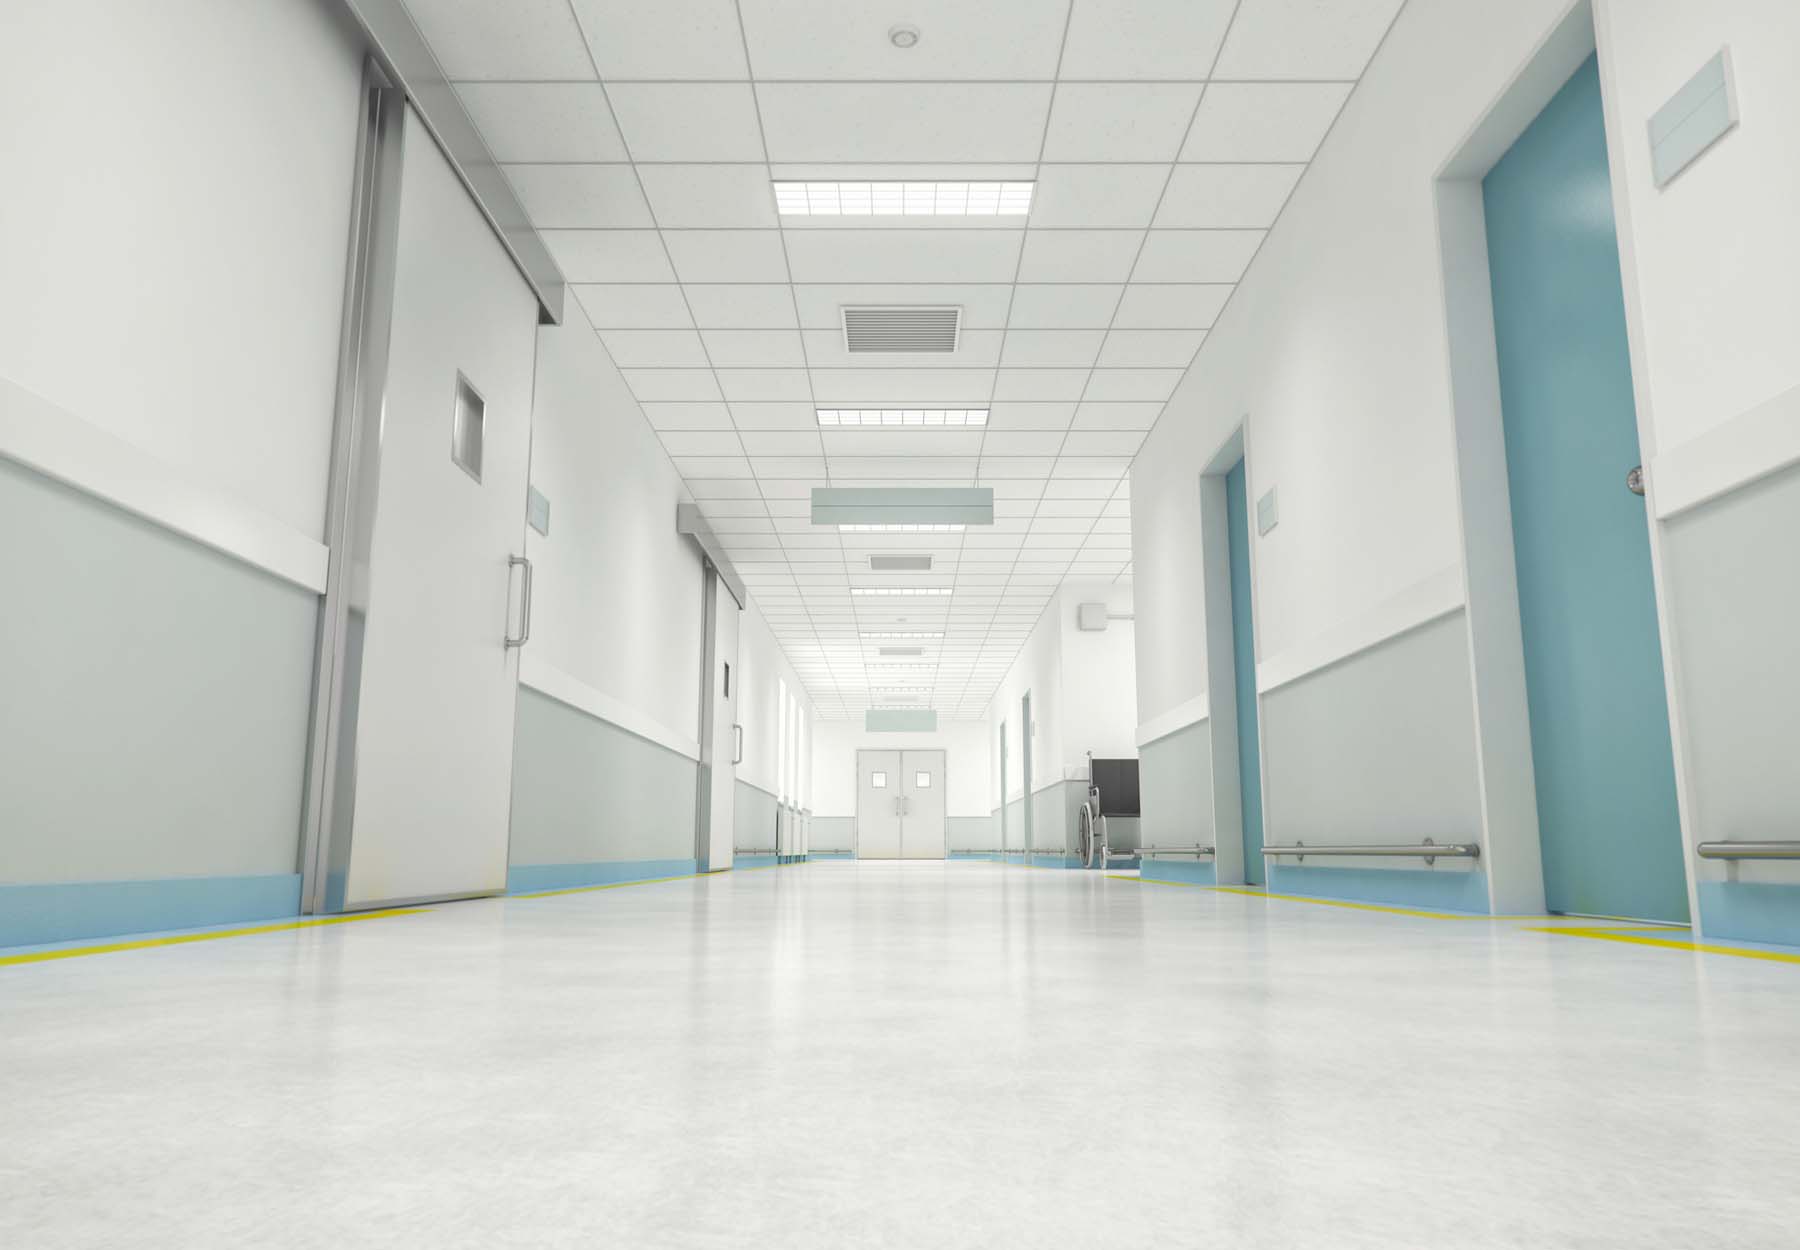 OSHA Fines Hospital for Not Protecting Staff from Workplace Violence